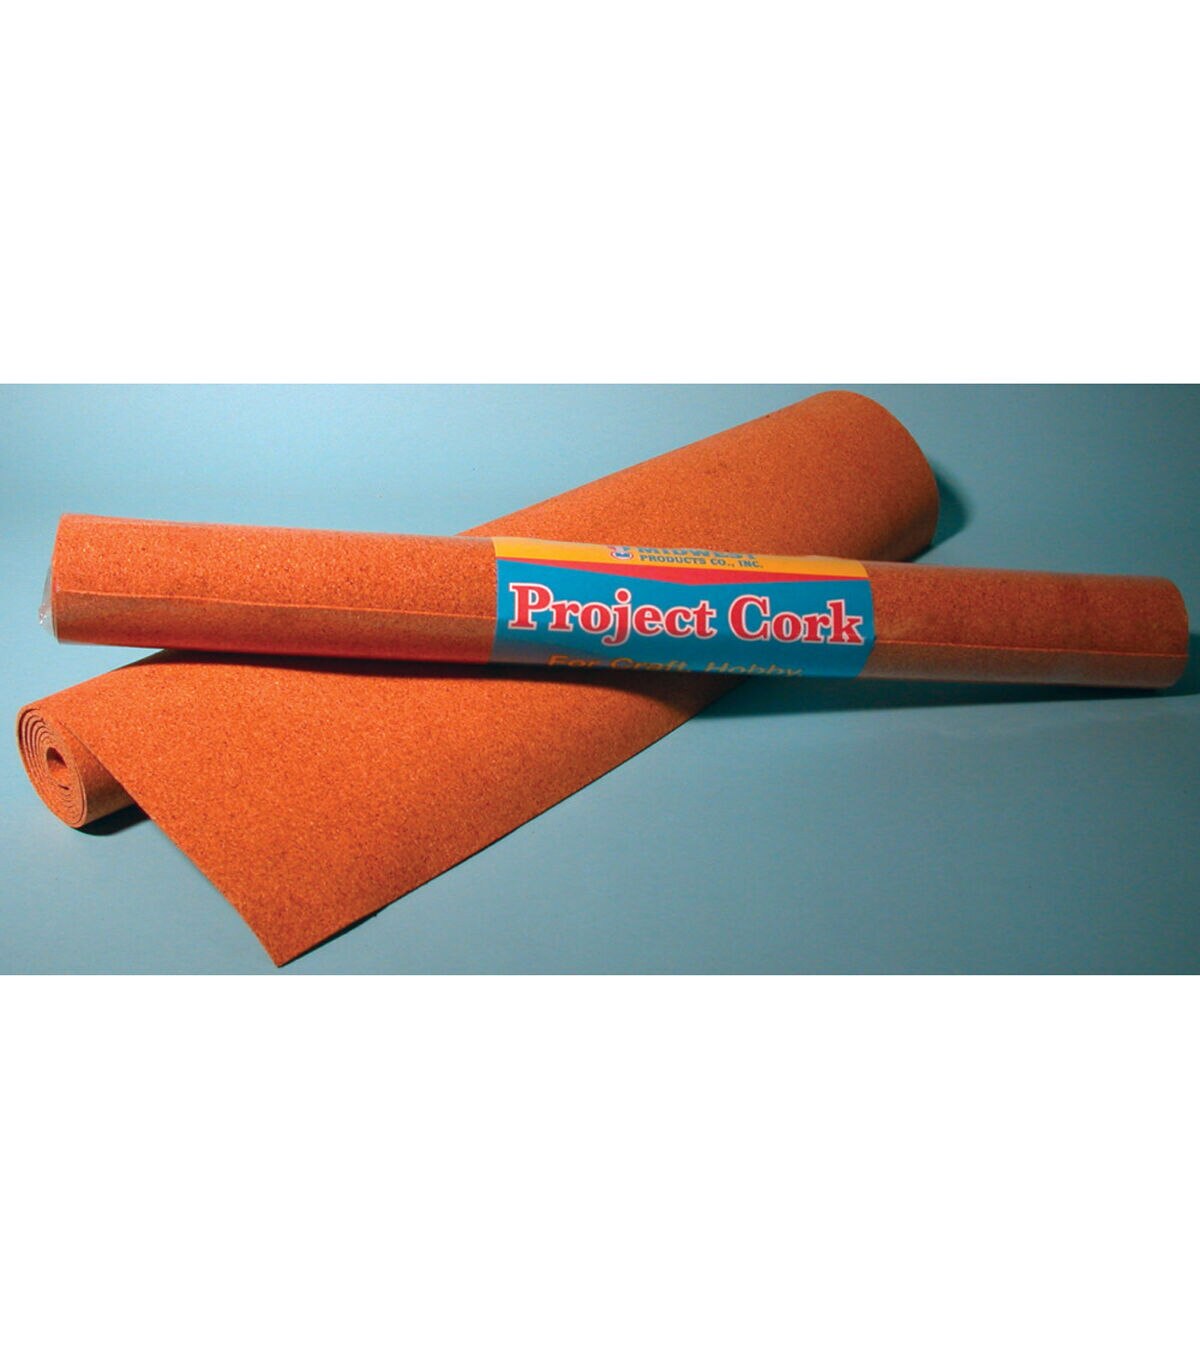 MIDWEST PRODUCTS COMPANY MWP3045  MIDWEST CORK ROLL 24X48X1 16 